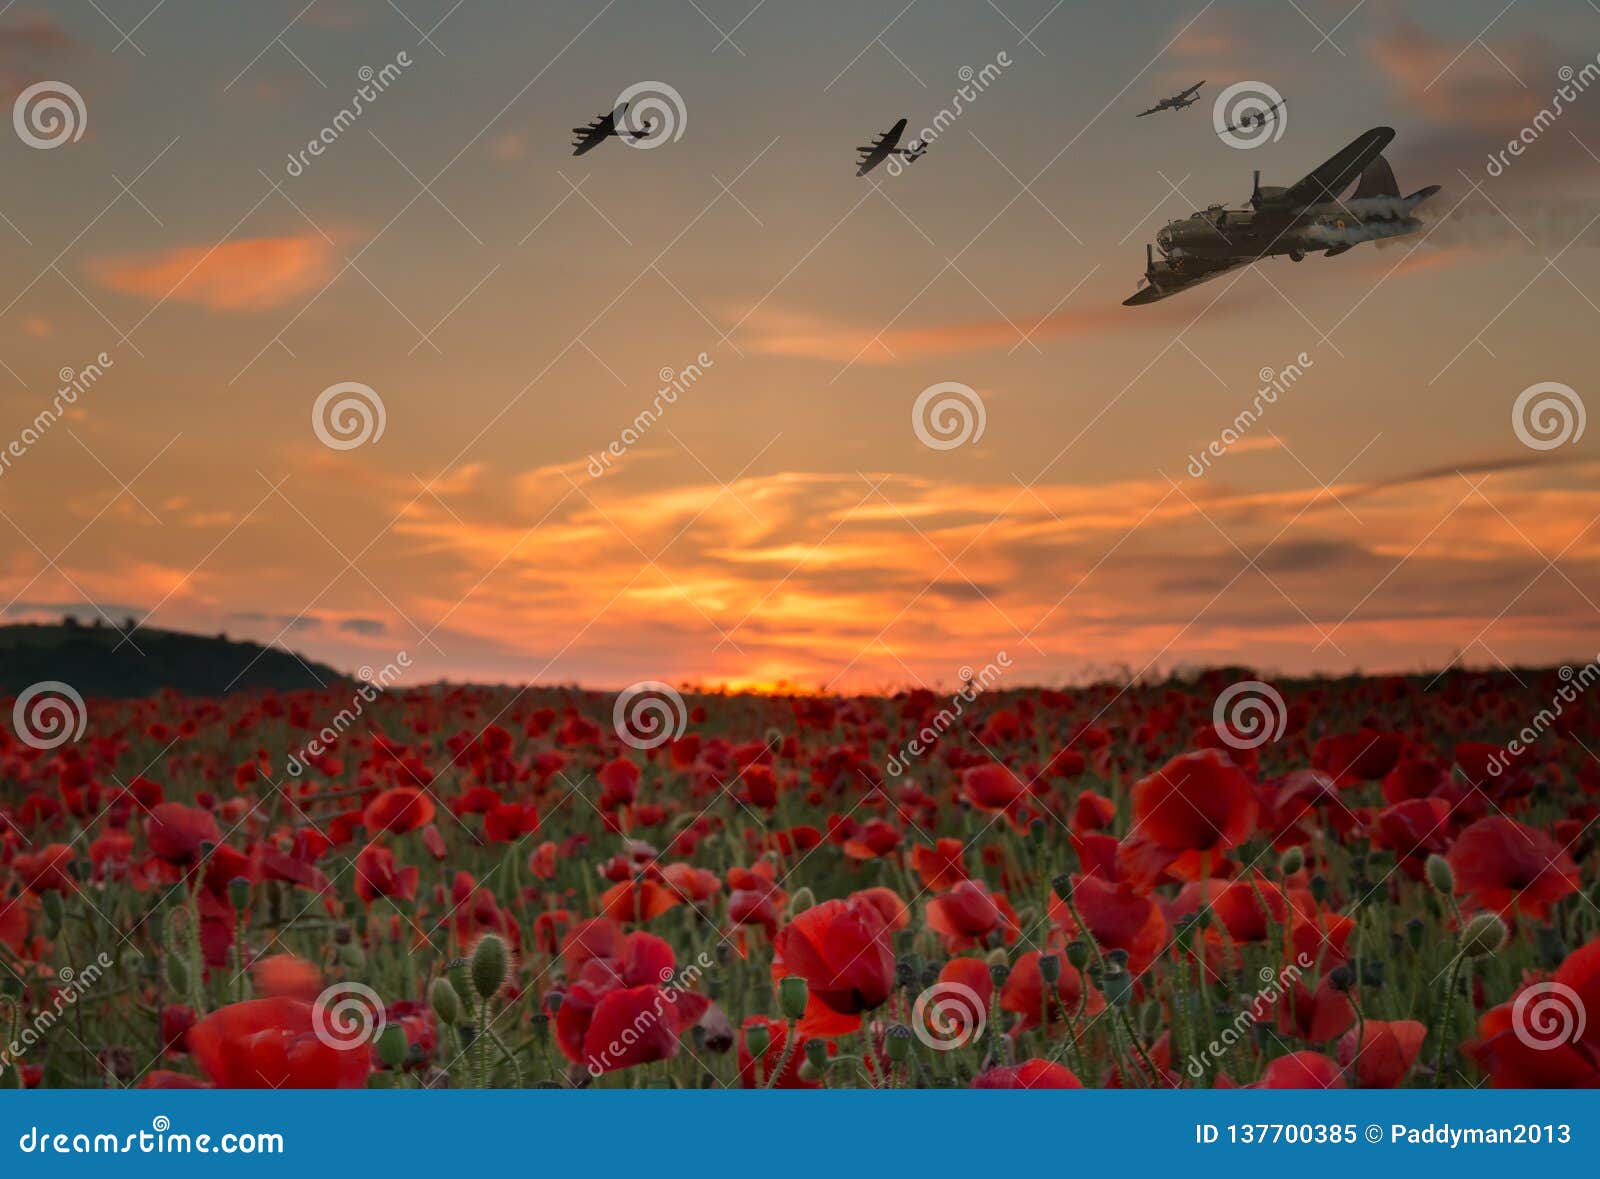 Lest we Forget War Planes Flying Over Red Poppy Field Stock Image - Image  of lancaster, heroes: 137700385